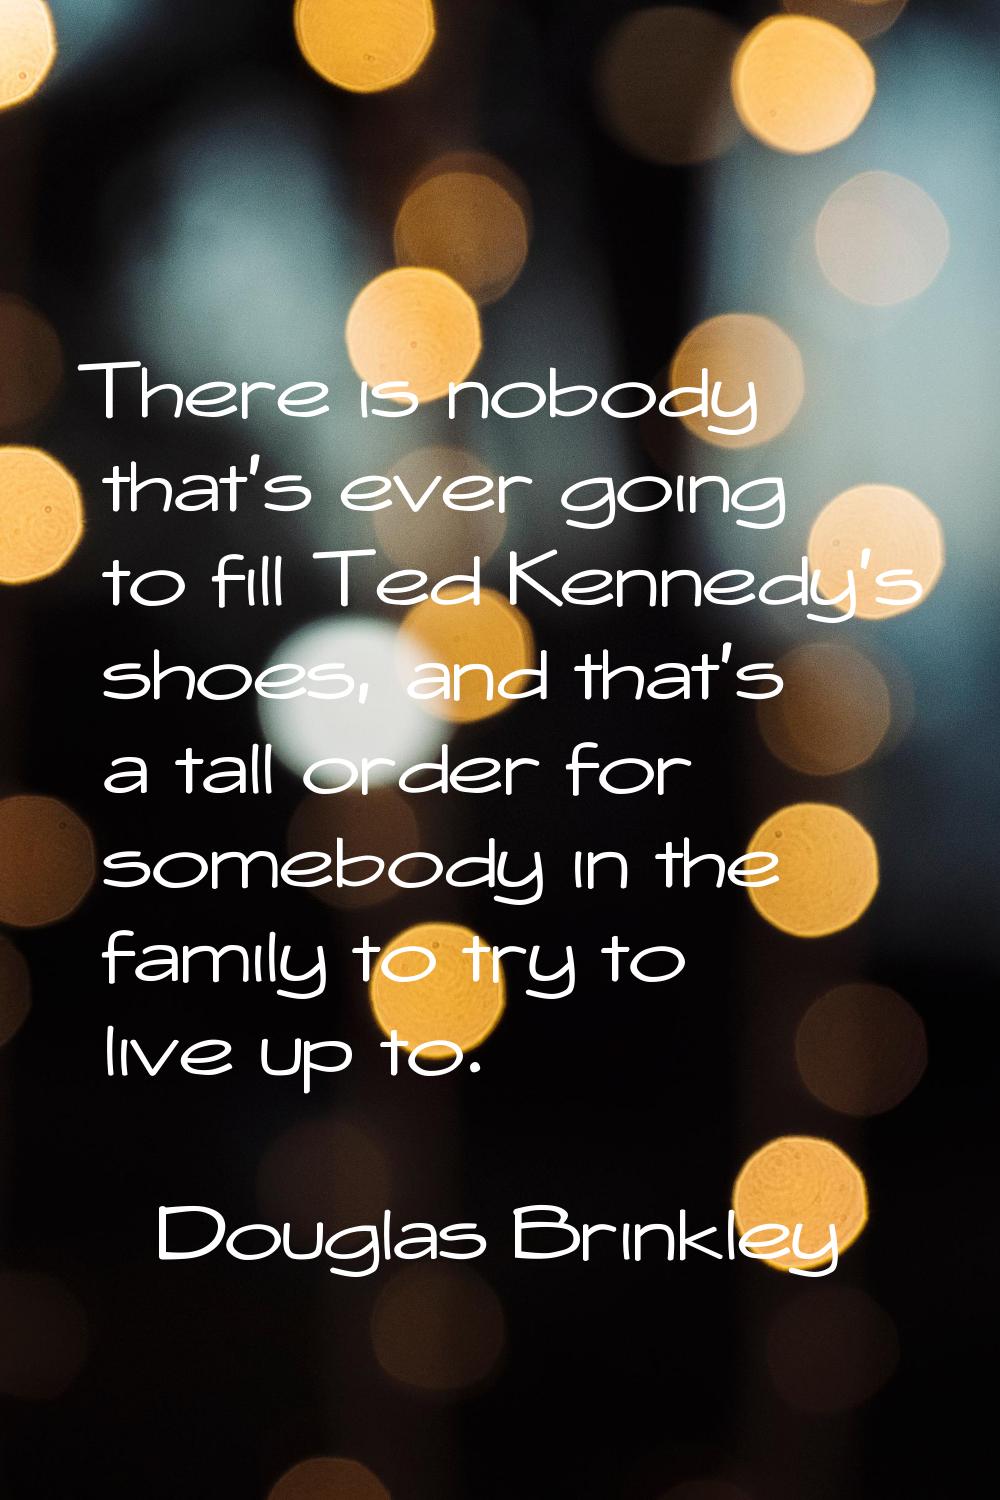 There is nobody that's ever going to fill Ted Kennedy's shoes, and that's a tall order for somebody